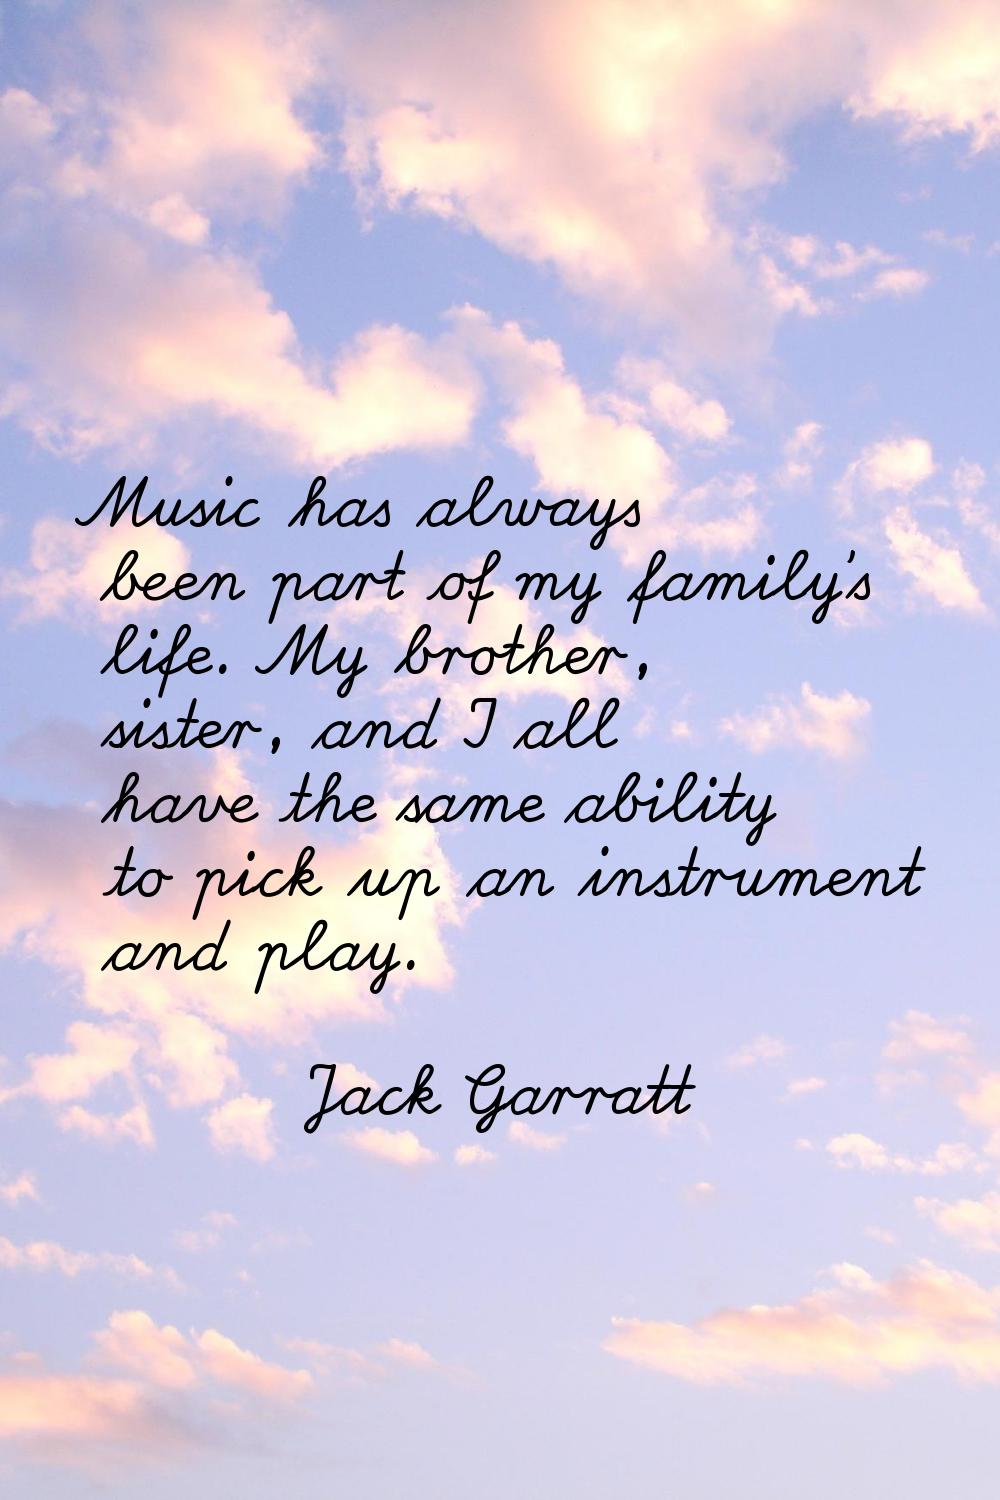 Music has always been part of my family's life. My brother, sister, and I all have the same ability